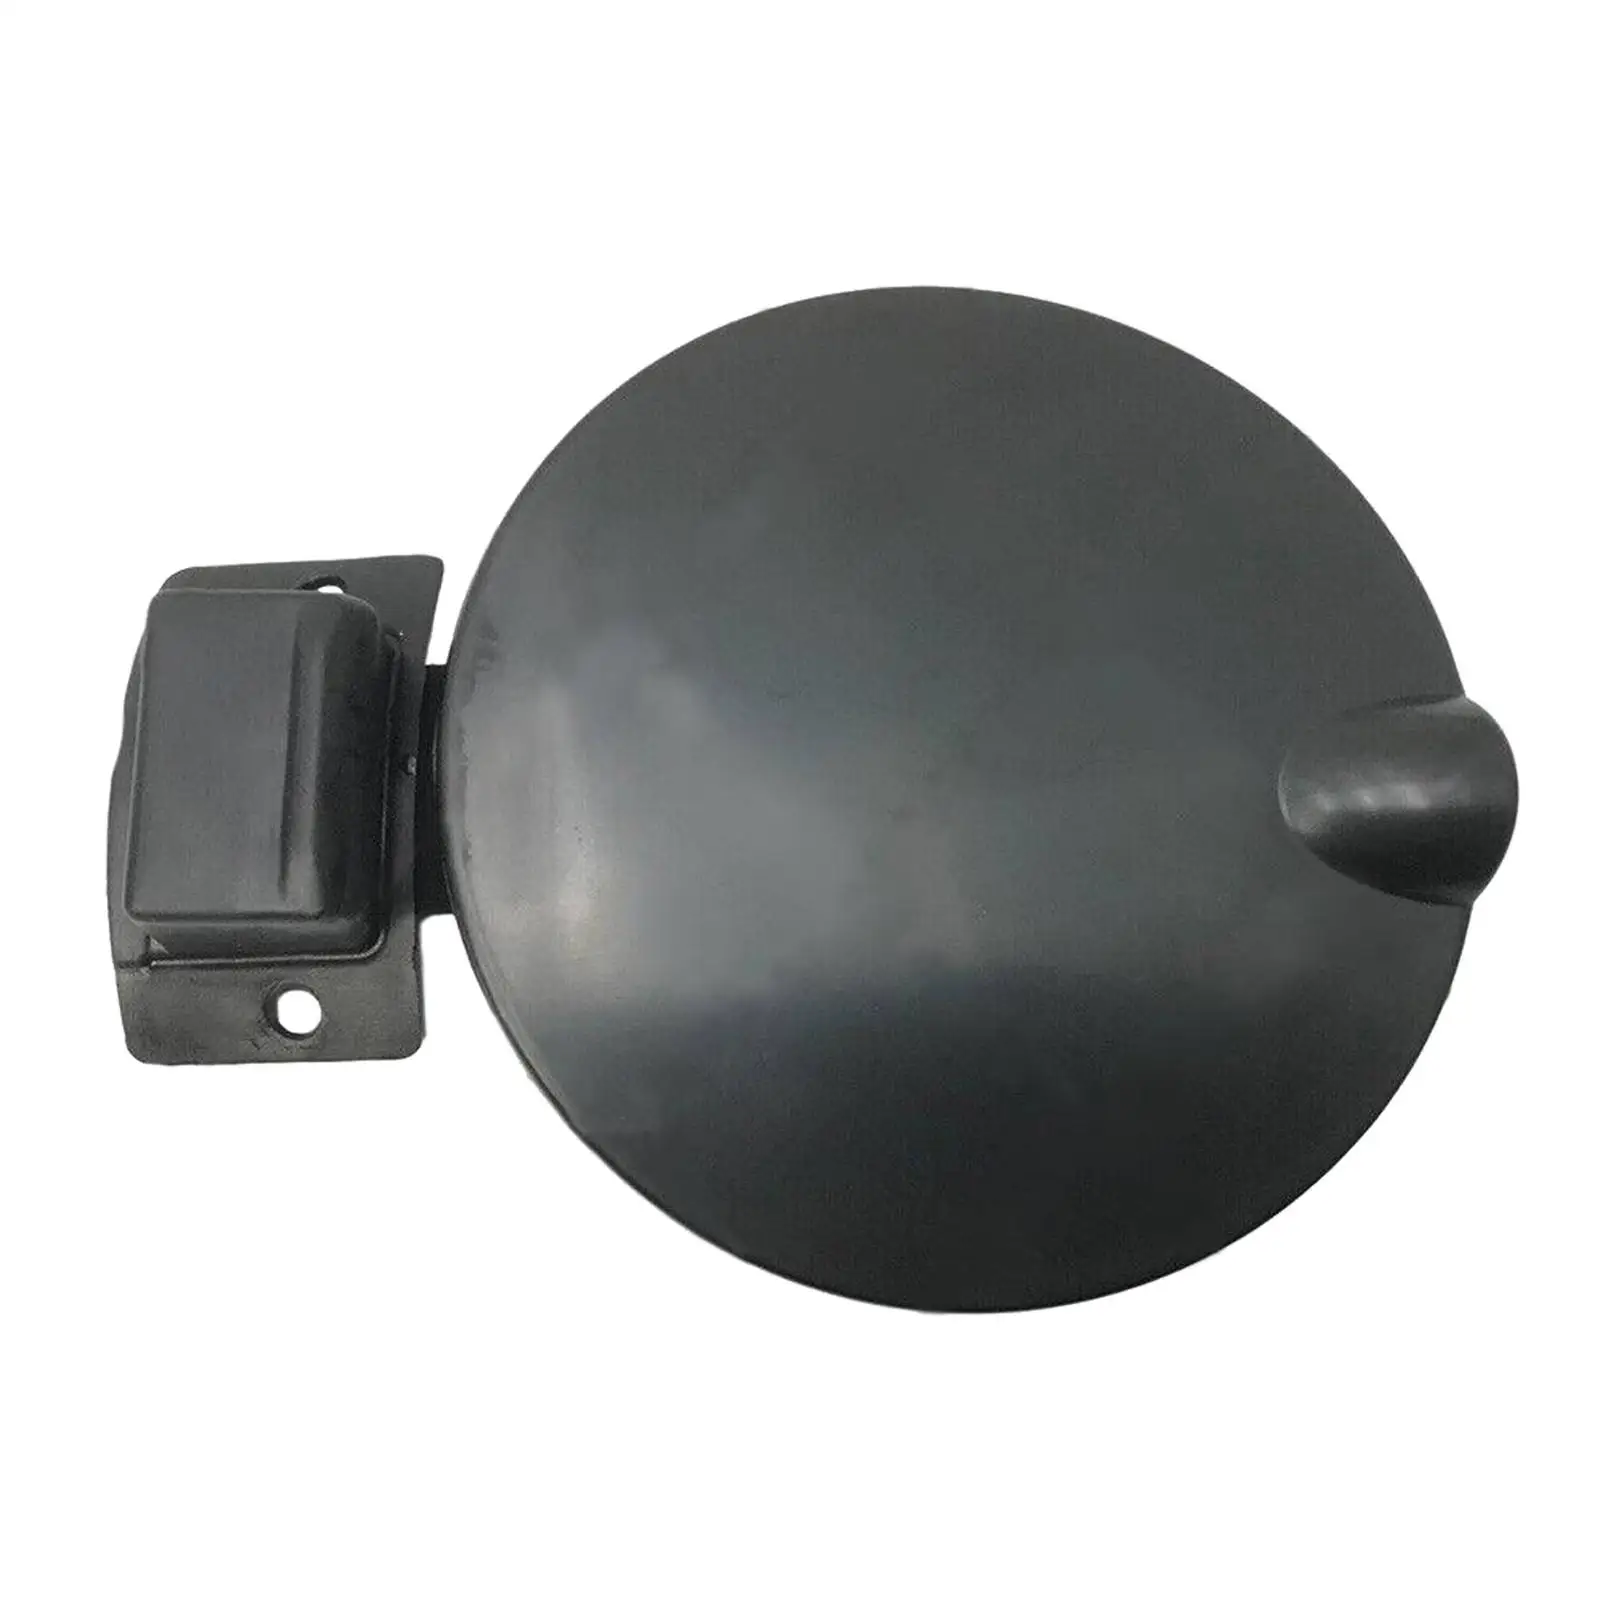 Fuel Filler Cap Fuel Tank Cap Fuel Filler Flap Cover Lid Modification for Holden VU Vy Vz Premium Sturdy Easy to Use